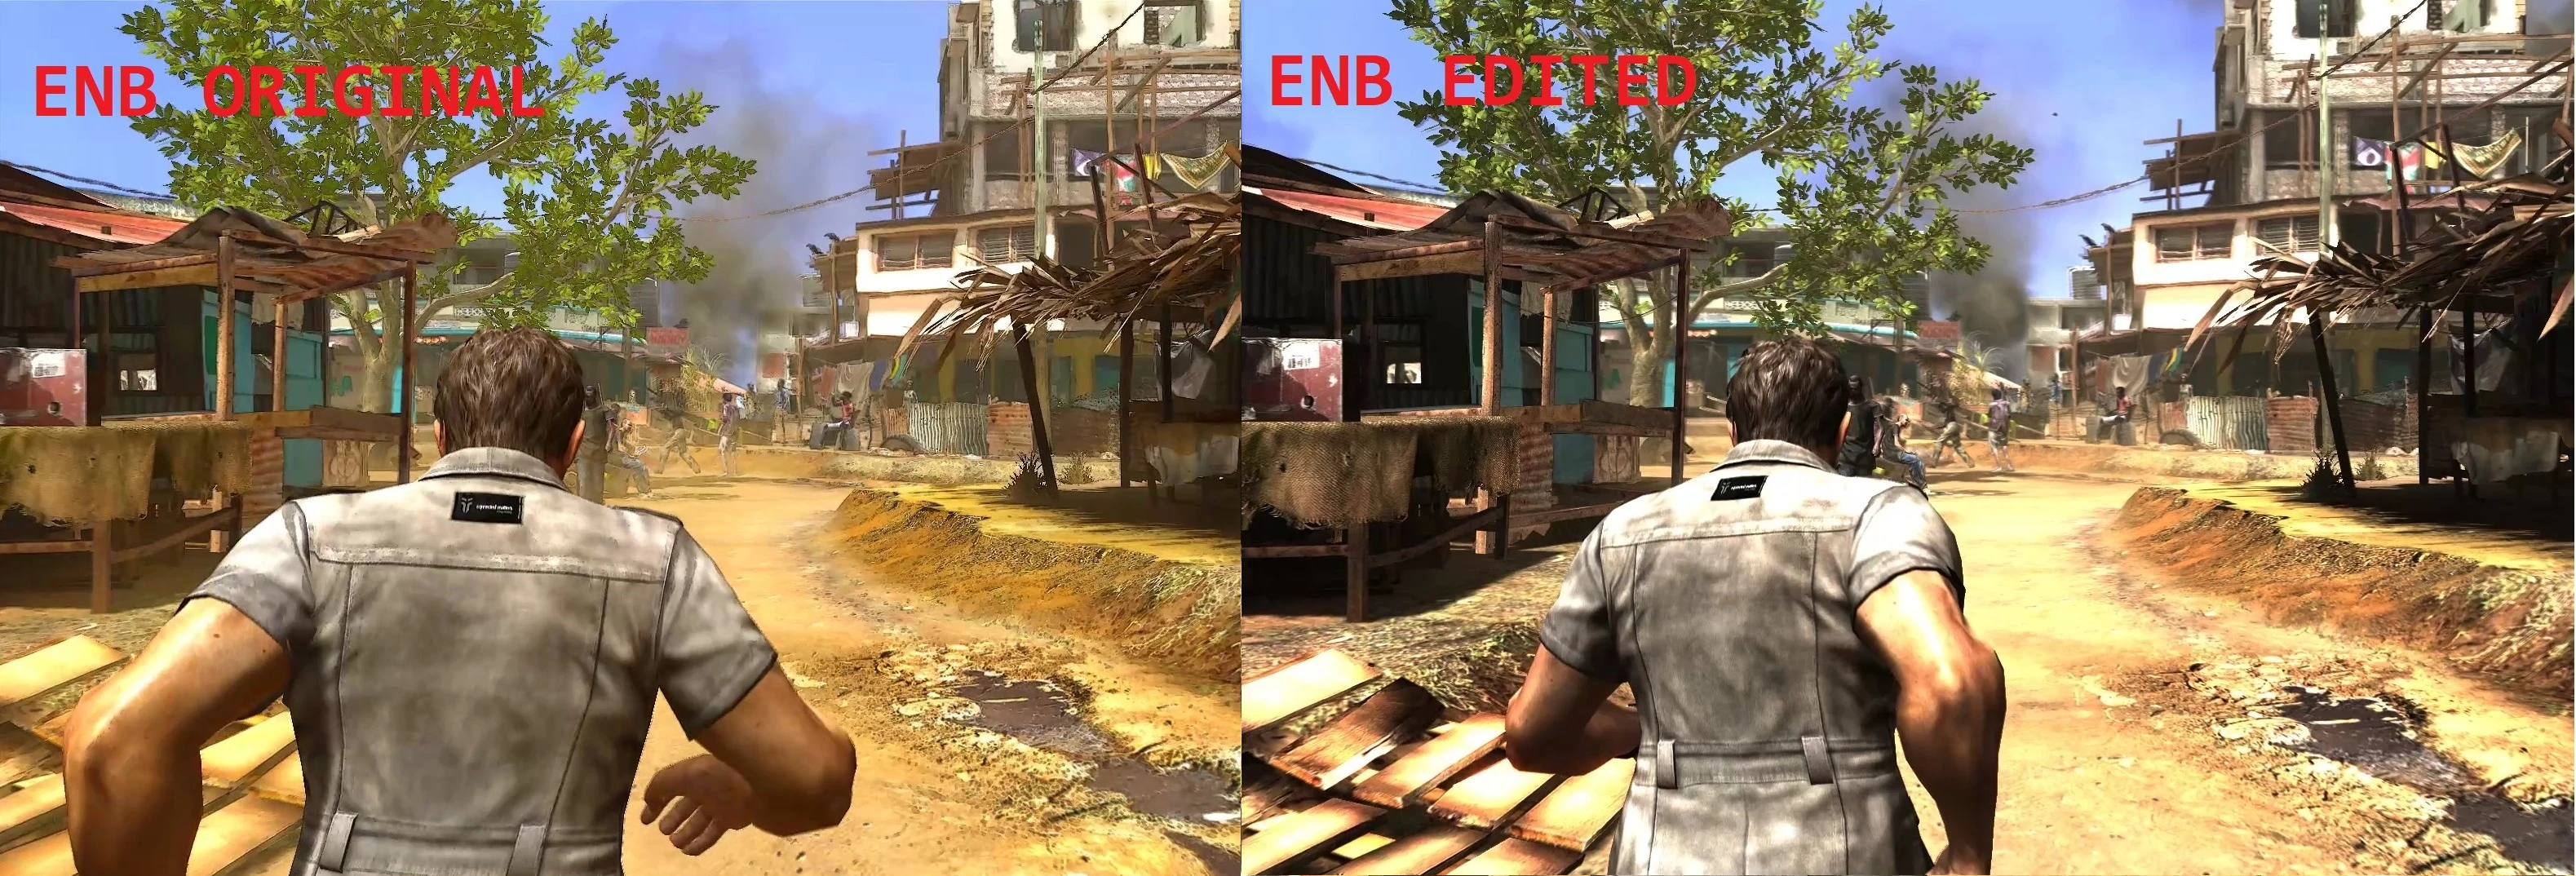 Photorealistic Mod for RE5 for Resident Evil 5 - ModDB